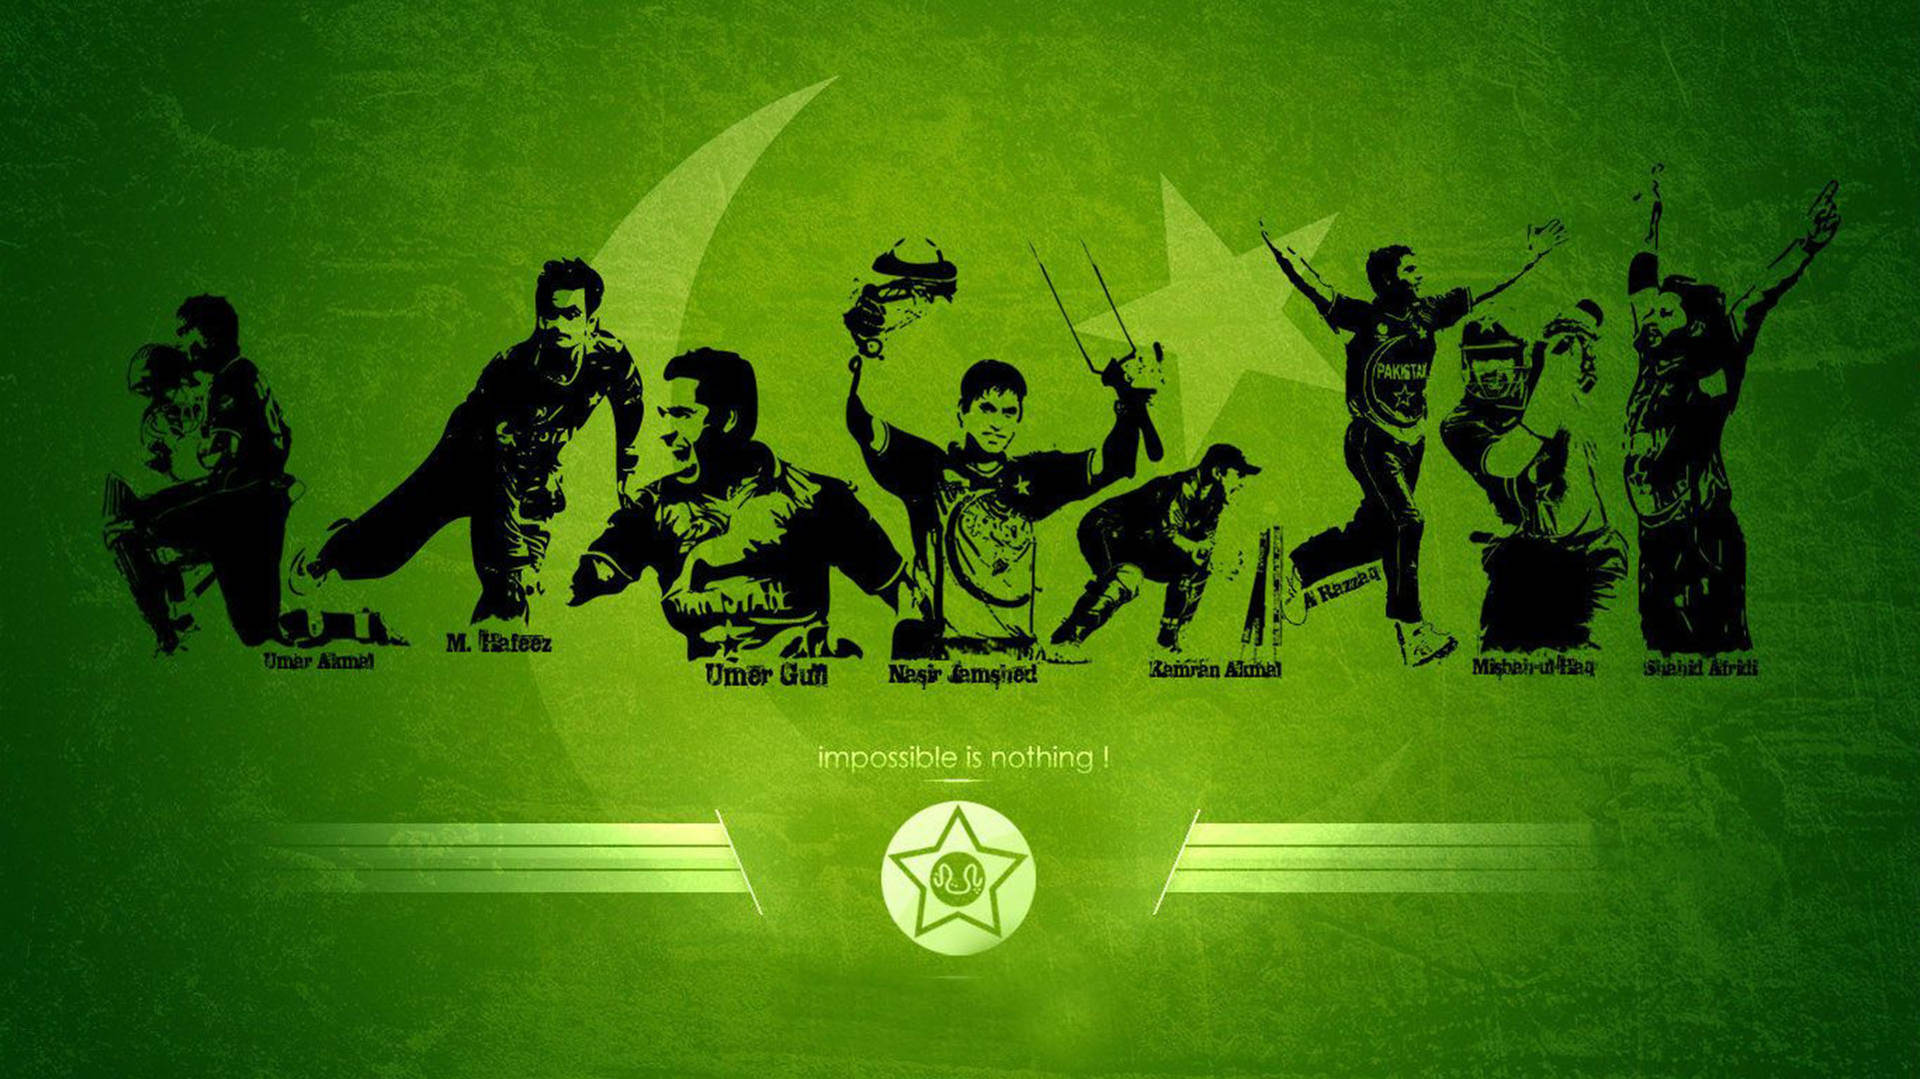 The Pride of Pakistan - Team Green in Action Wallpaper